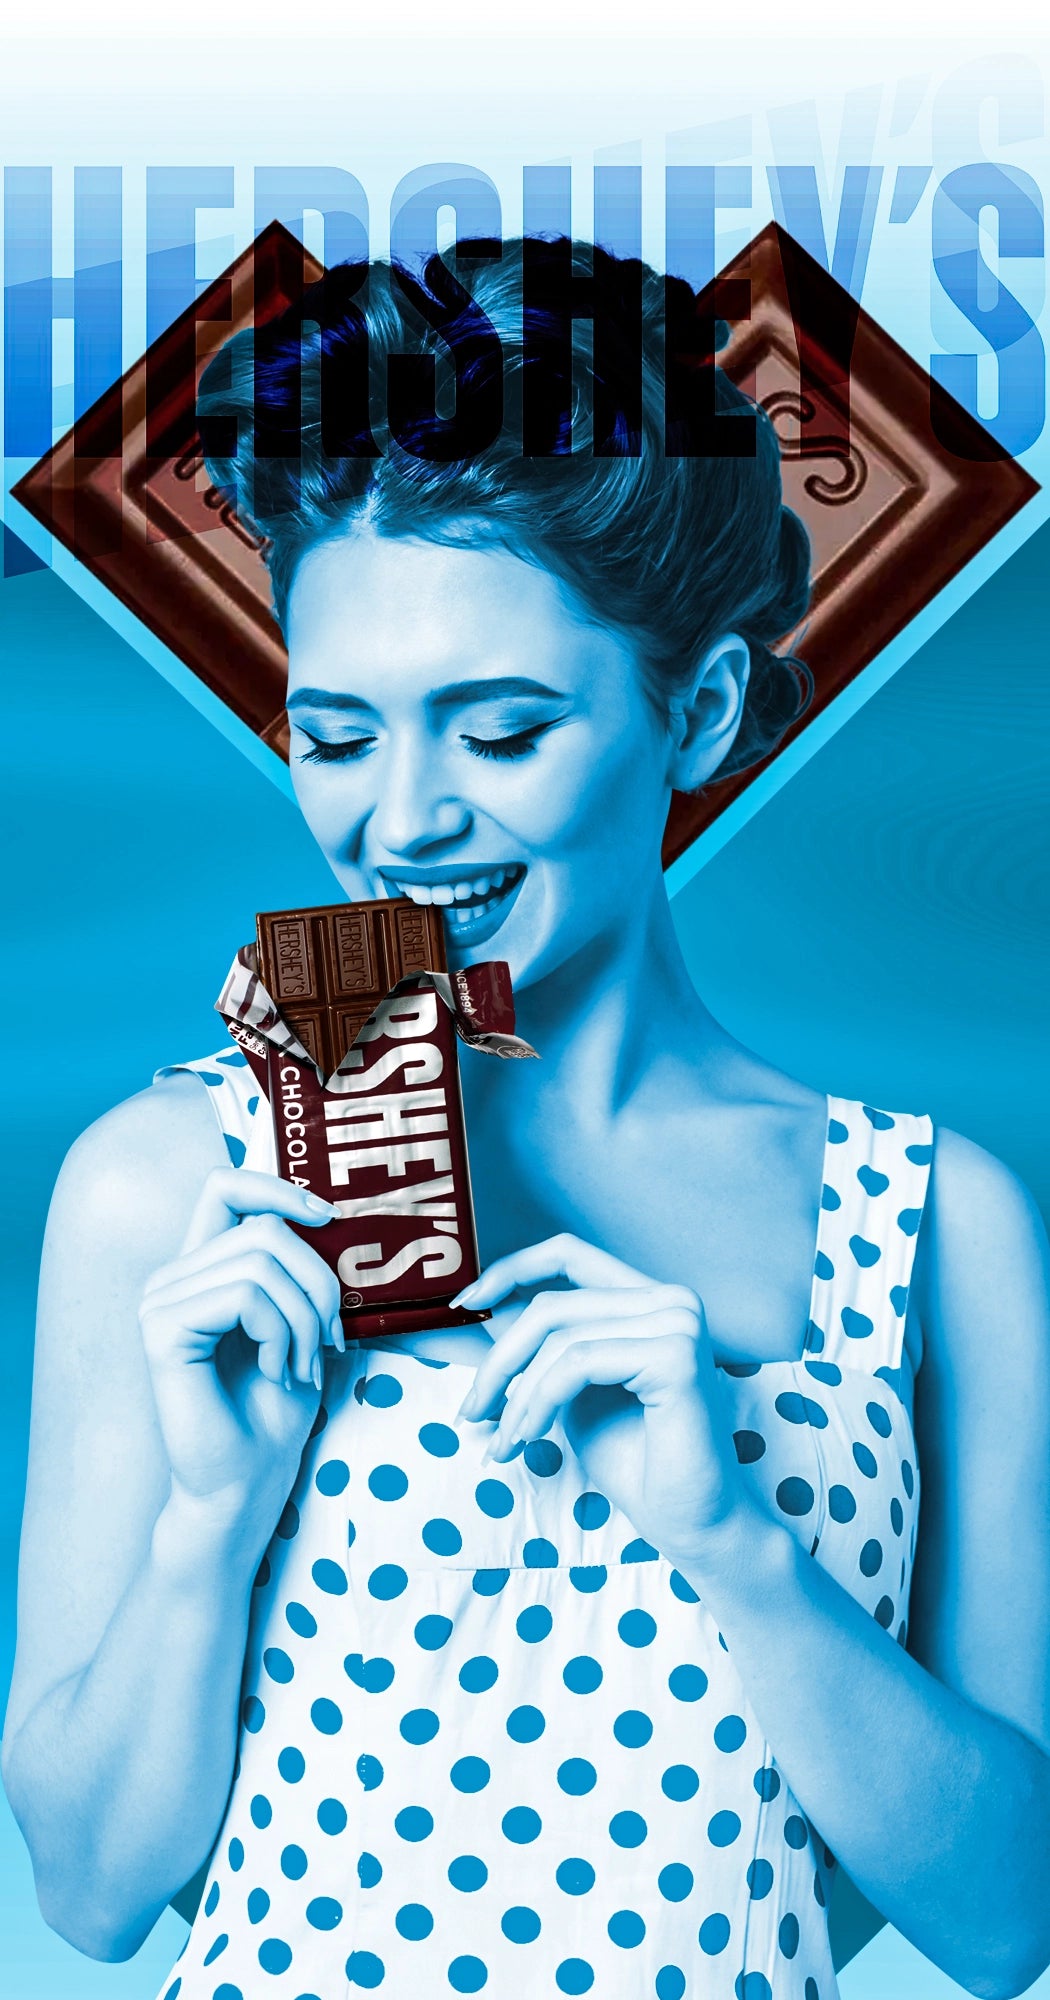 Hersheys in collection banner